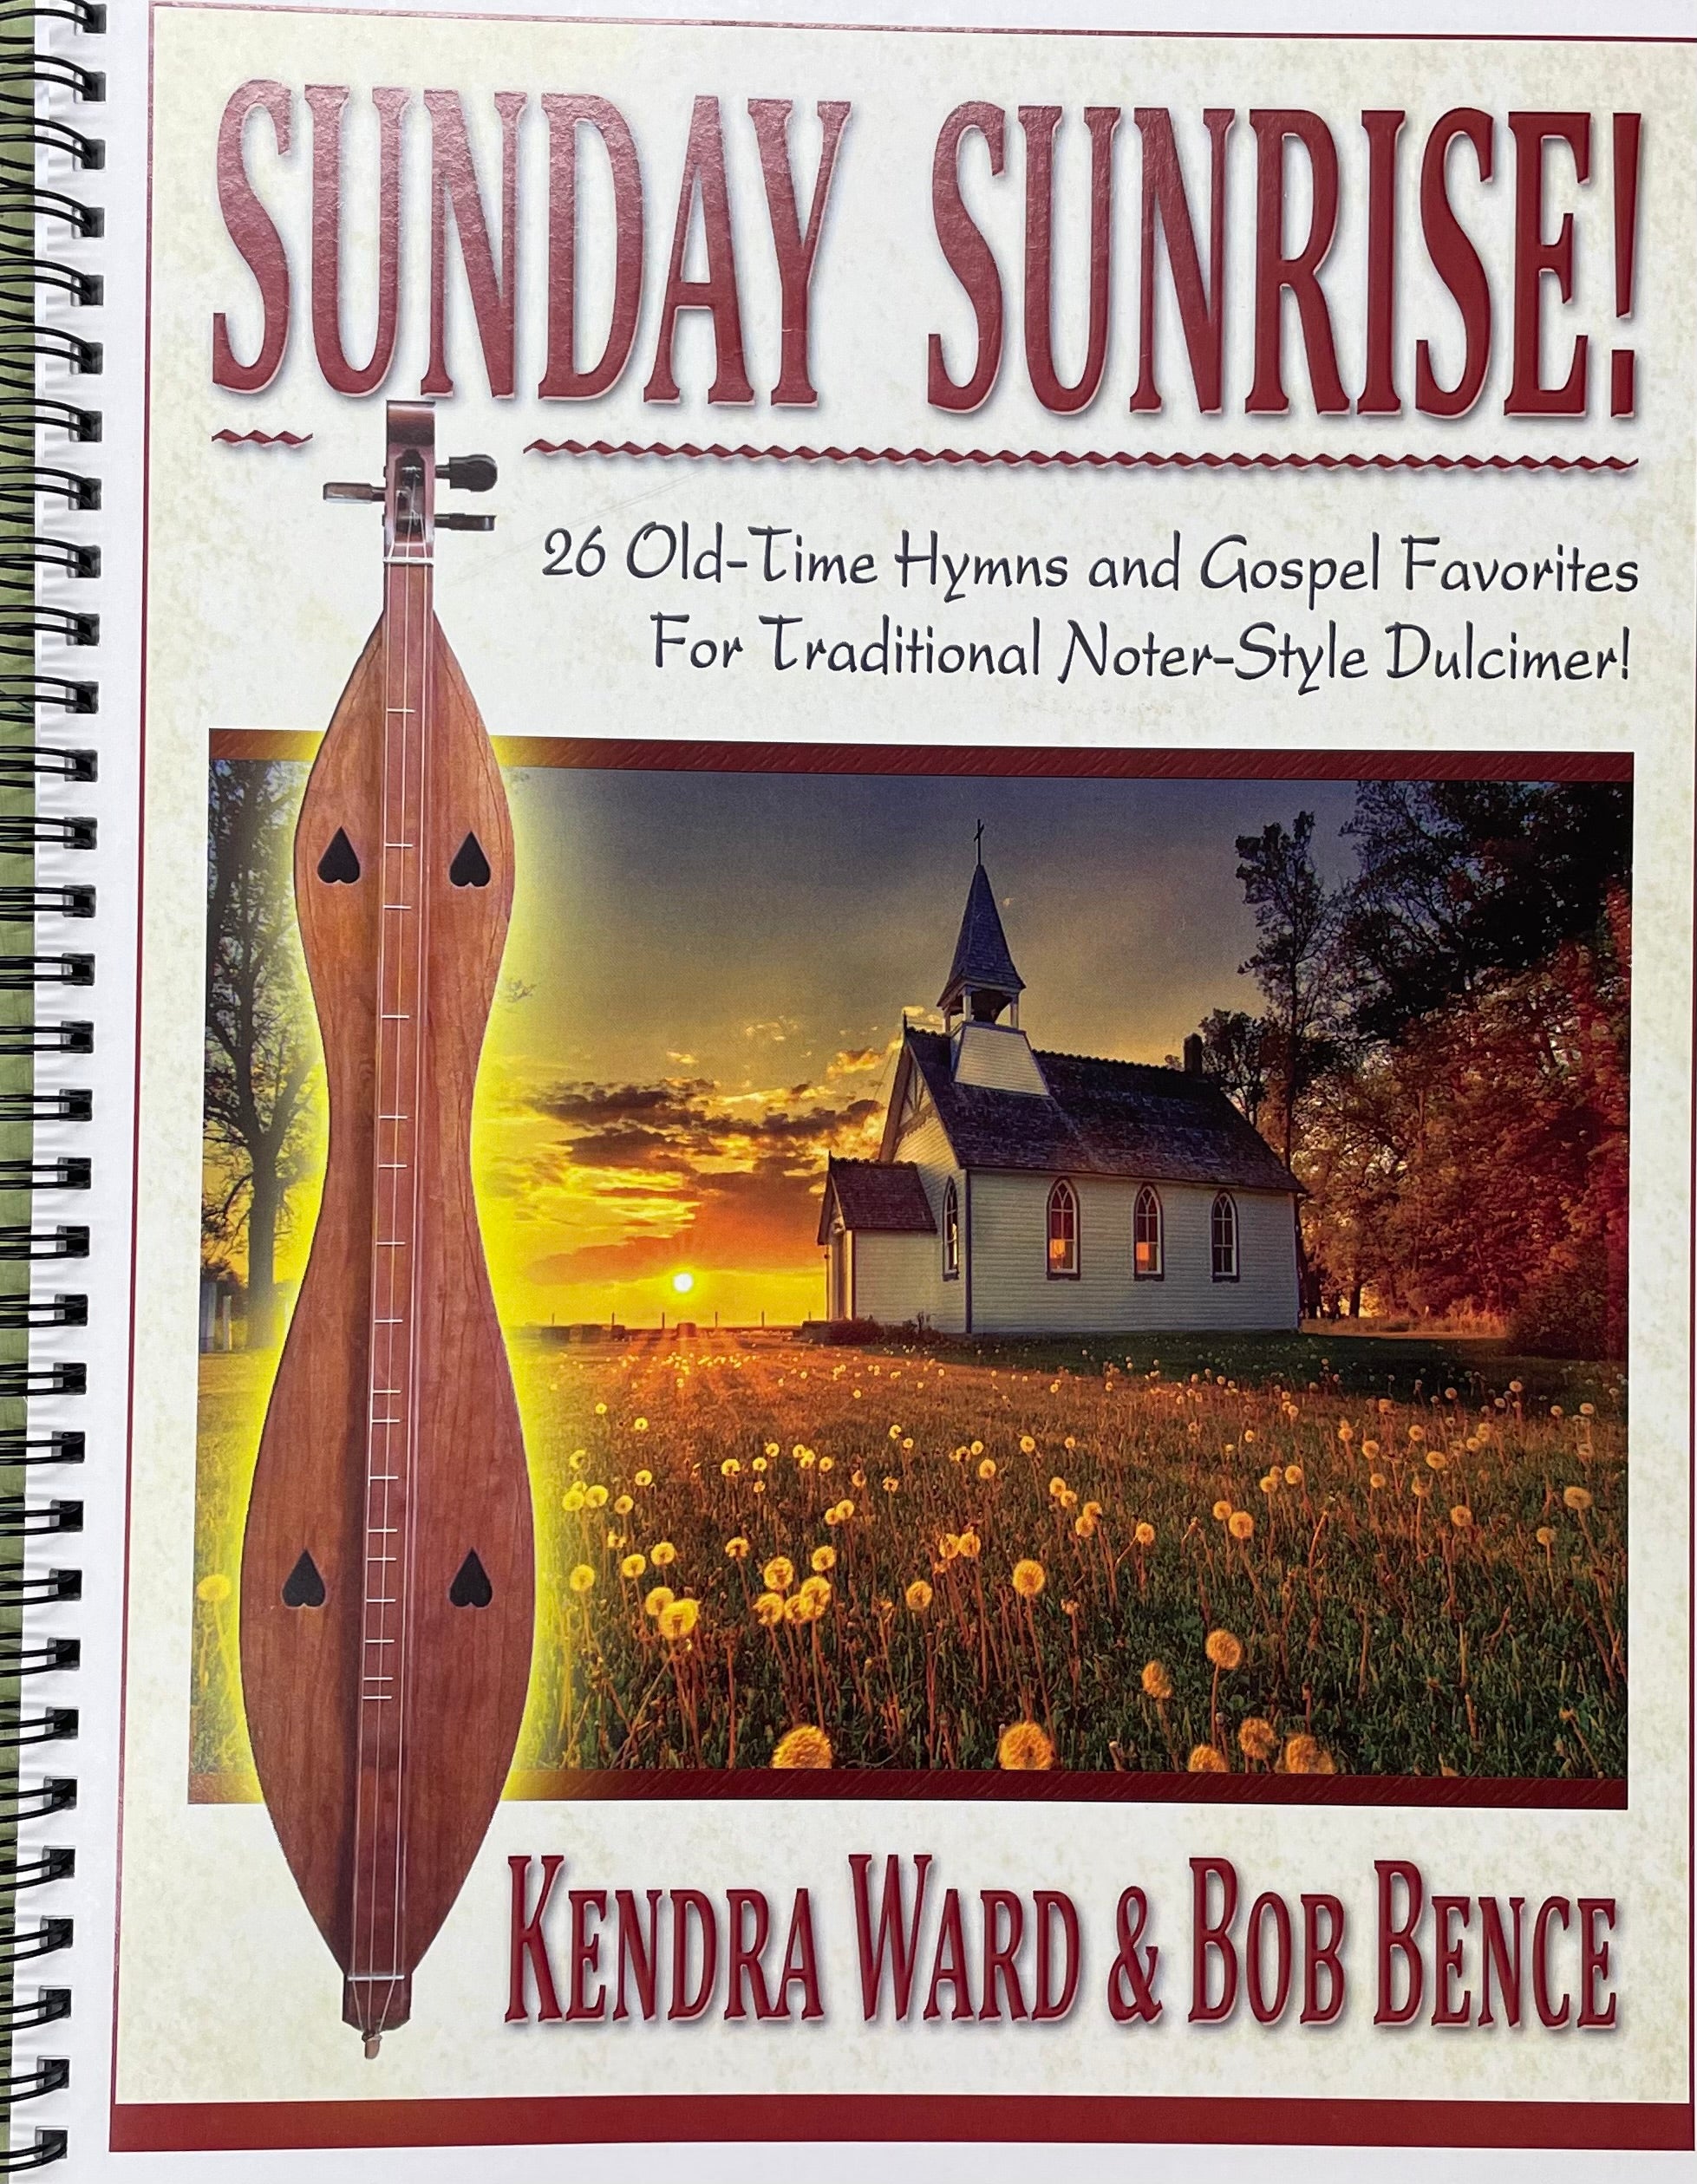 Cover of the music book "Sunday Sunrise!" by Kendra Ward and Bob Bence, featuring a dulcimer and a church at sunrise, with the subtitle: "26 Old-Time Hymns and Gospel Favorites for Traditional Noter-Style Dulcimer.